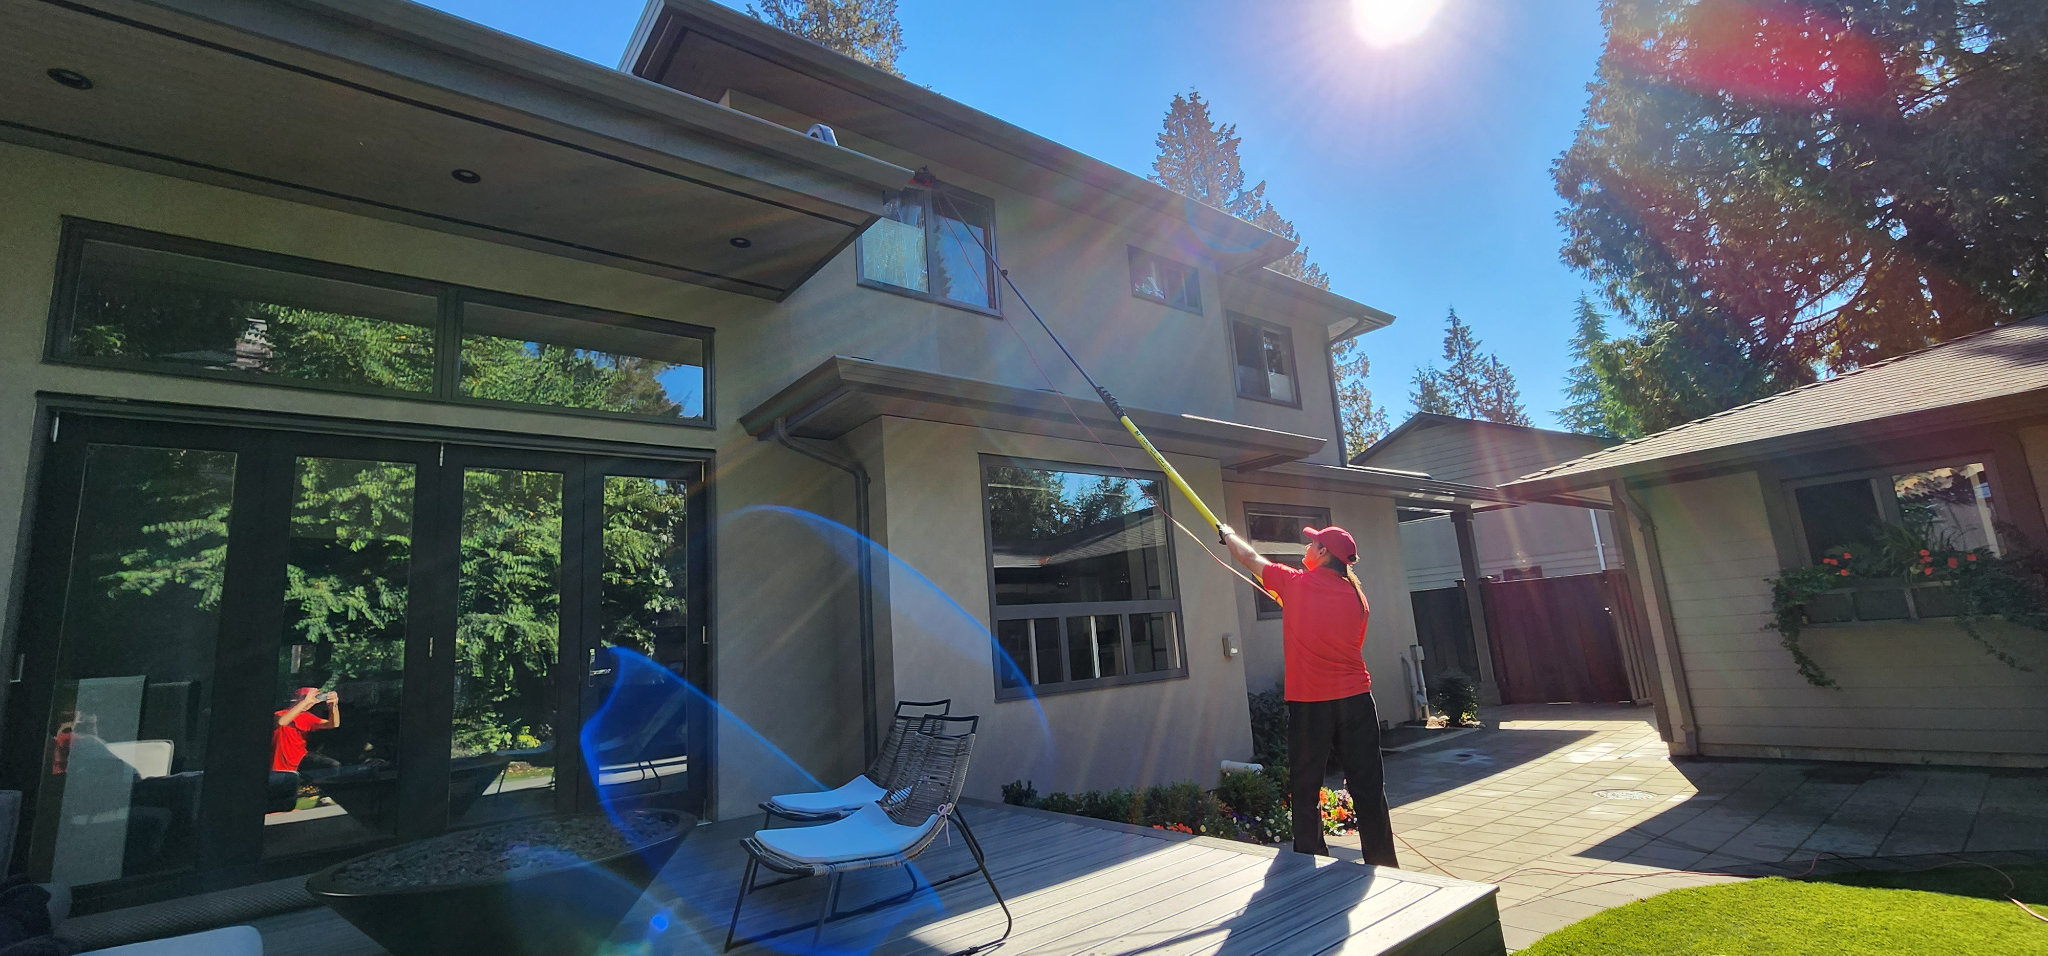 Guttervac team member cleaning upper level house window